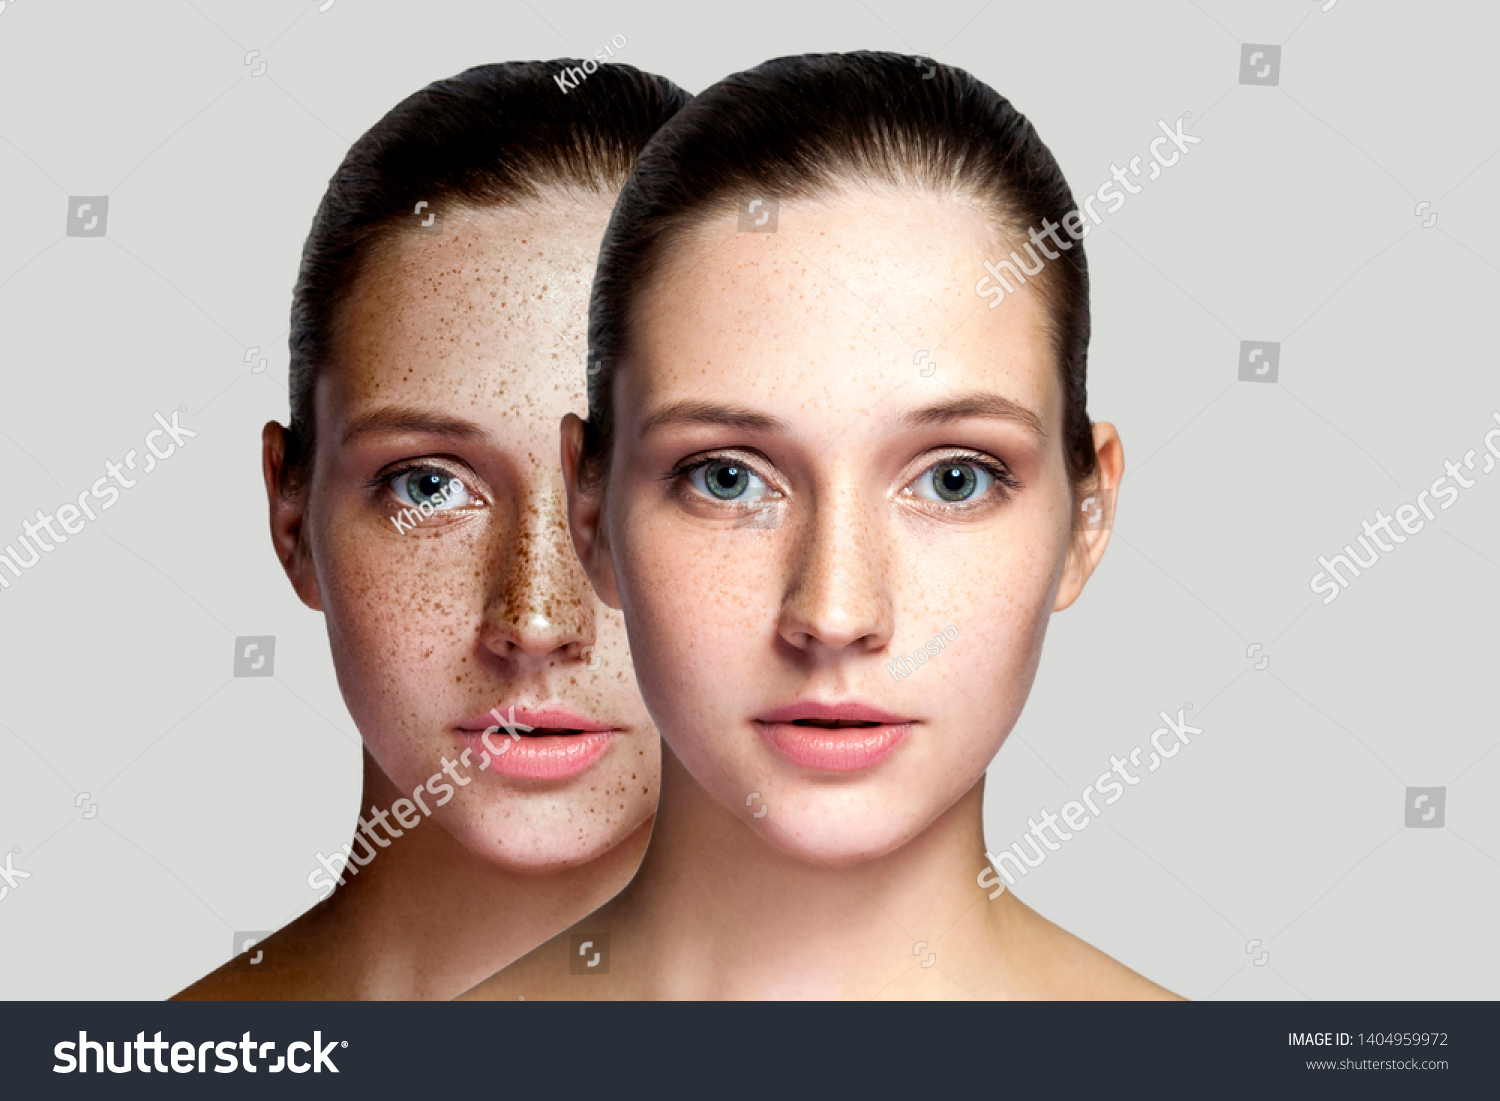 Closeup before and after portrait of beautiful brunette woman after laser treatment removing freckles on face looking at camera. makeup or cosmetology. indoor studio shot, isolated on gray background. #1404959972